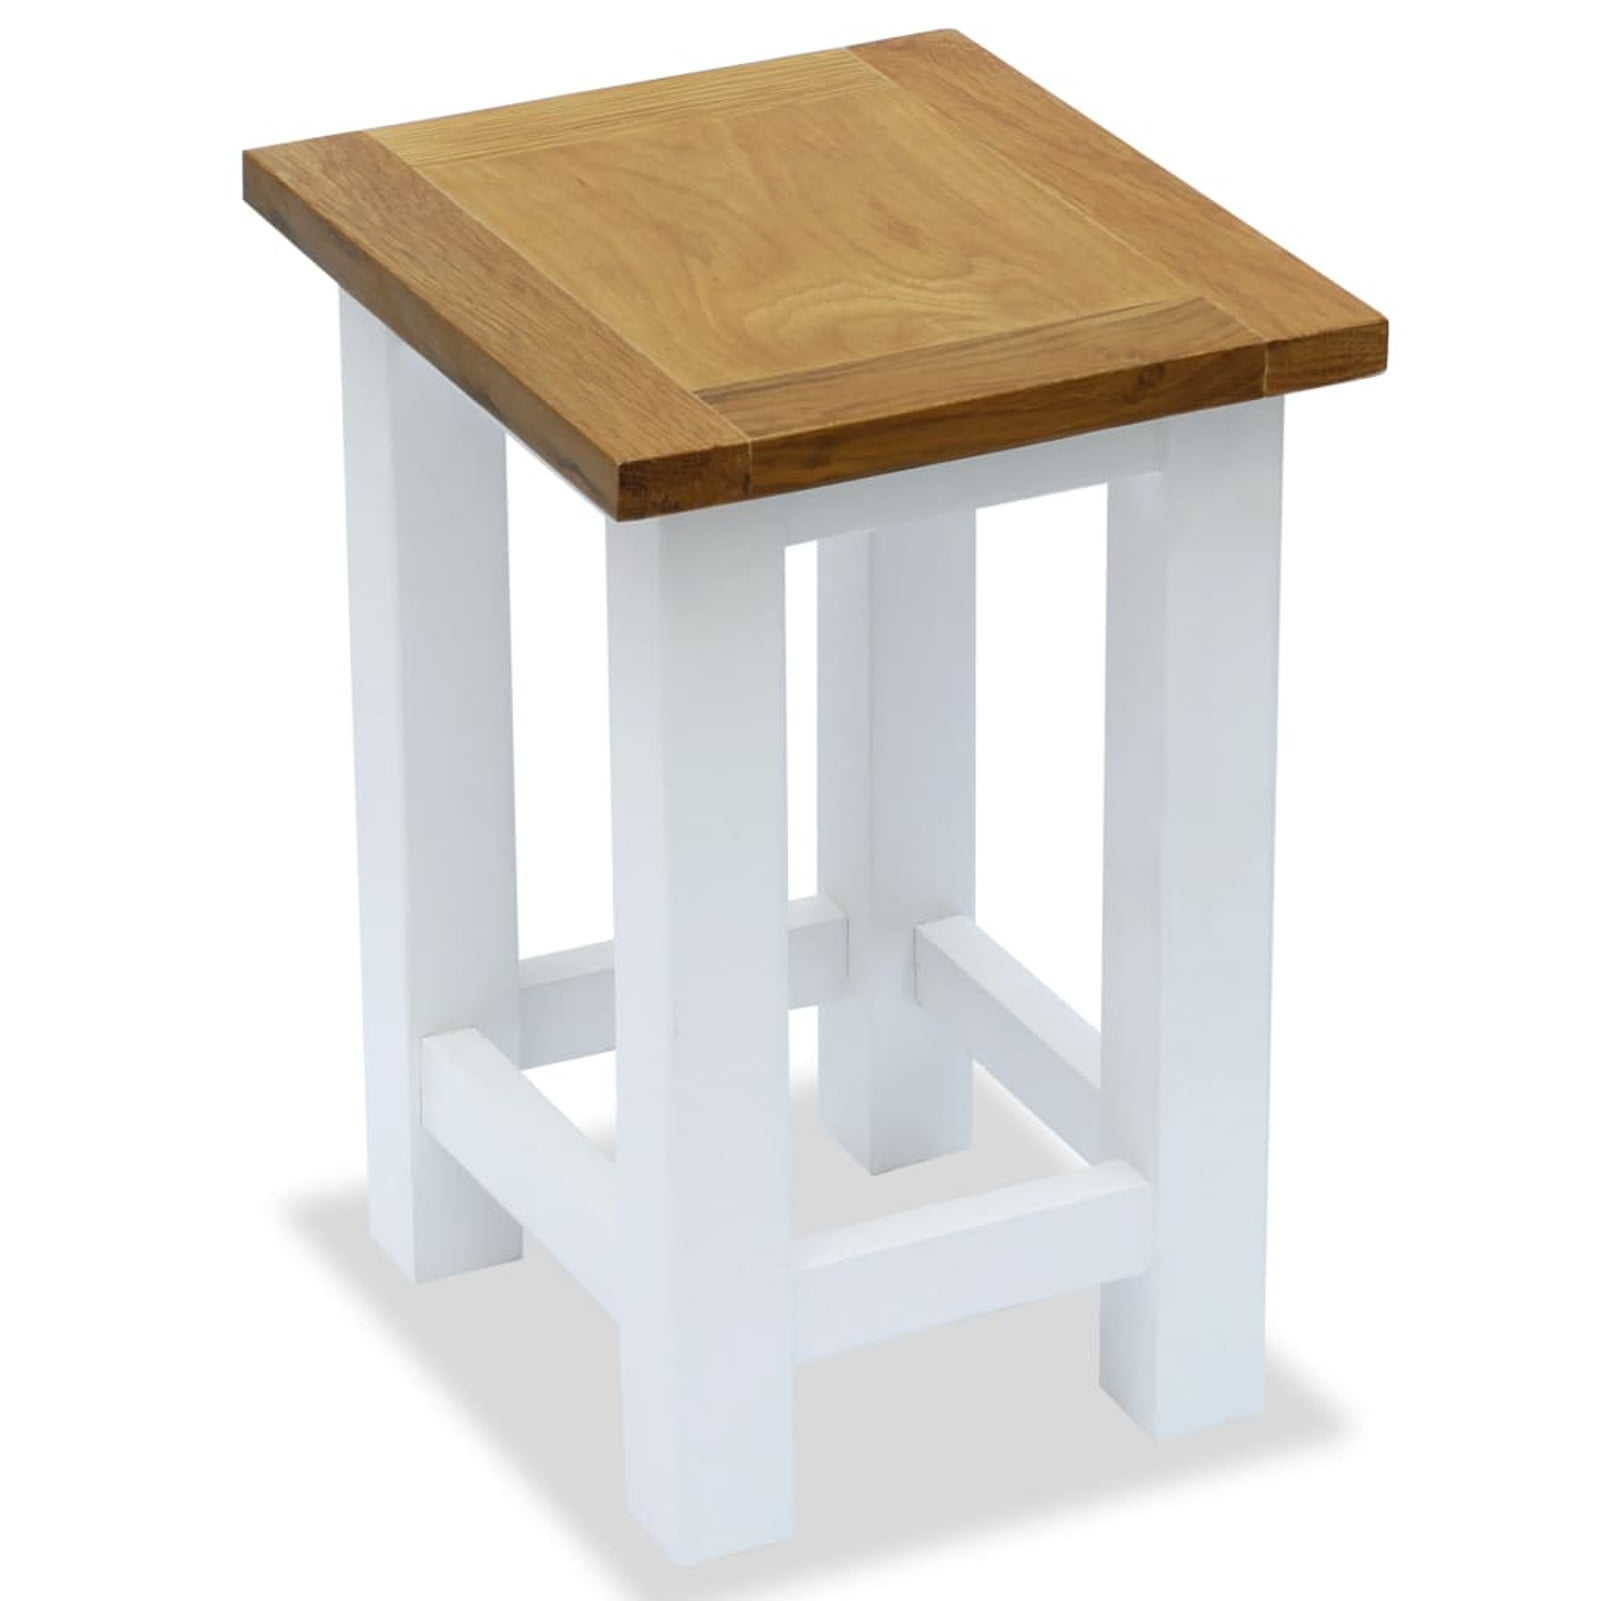 End Table with Magazine Shelf Solid Oak Wood 10.6"x13.8"x21.7" Living Room Home 